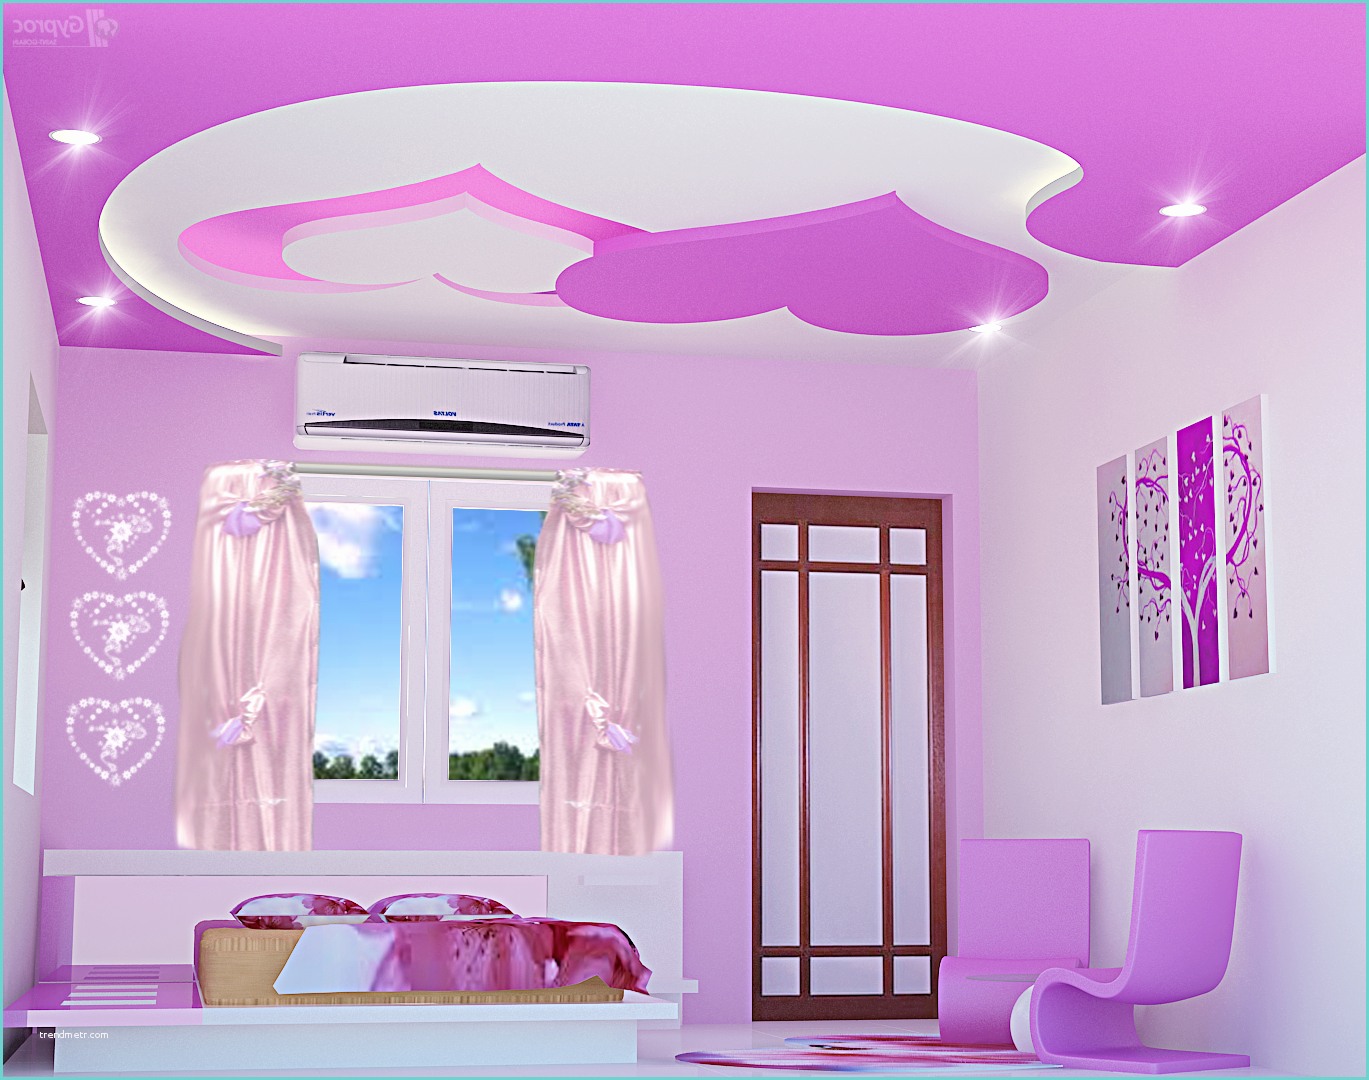 Pop Design Ceiling Image Down Pop Ceiling for Drawing Rooms Home Bo